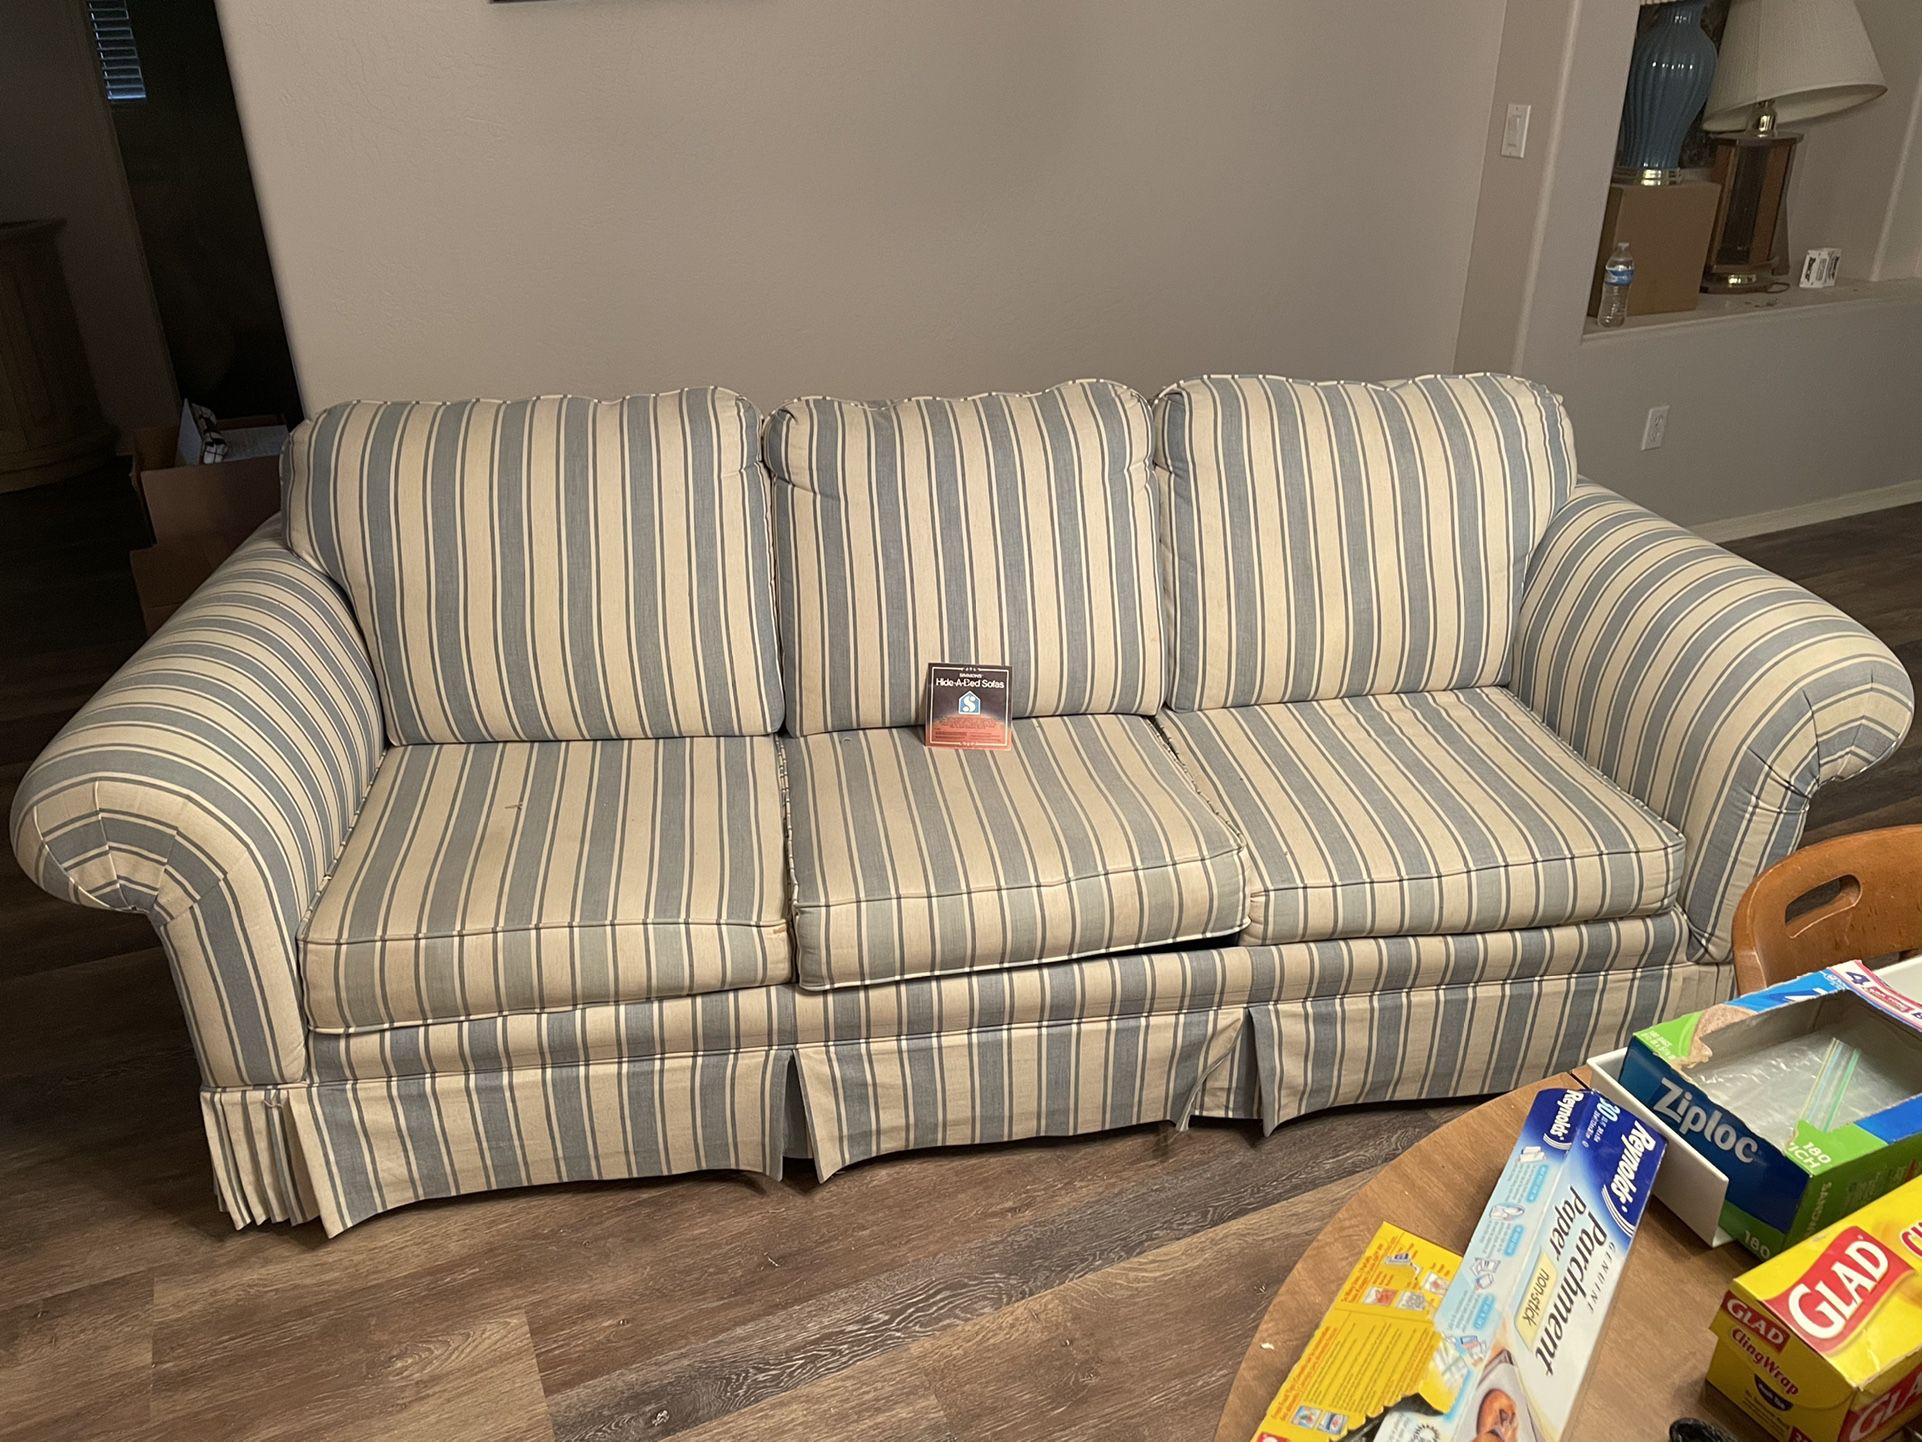 FREE Sleeper Couch And Love Seat